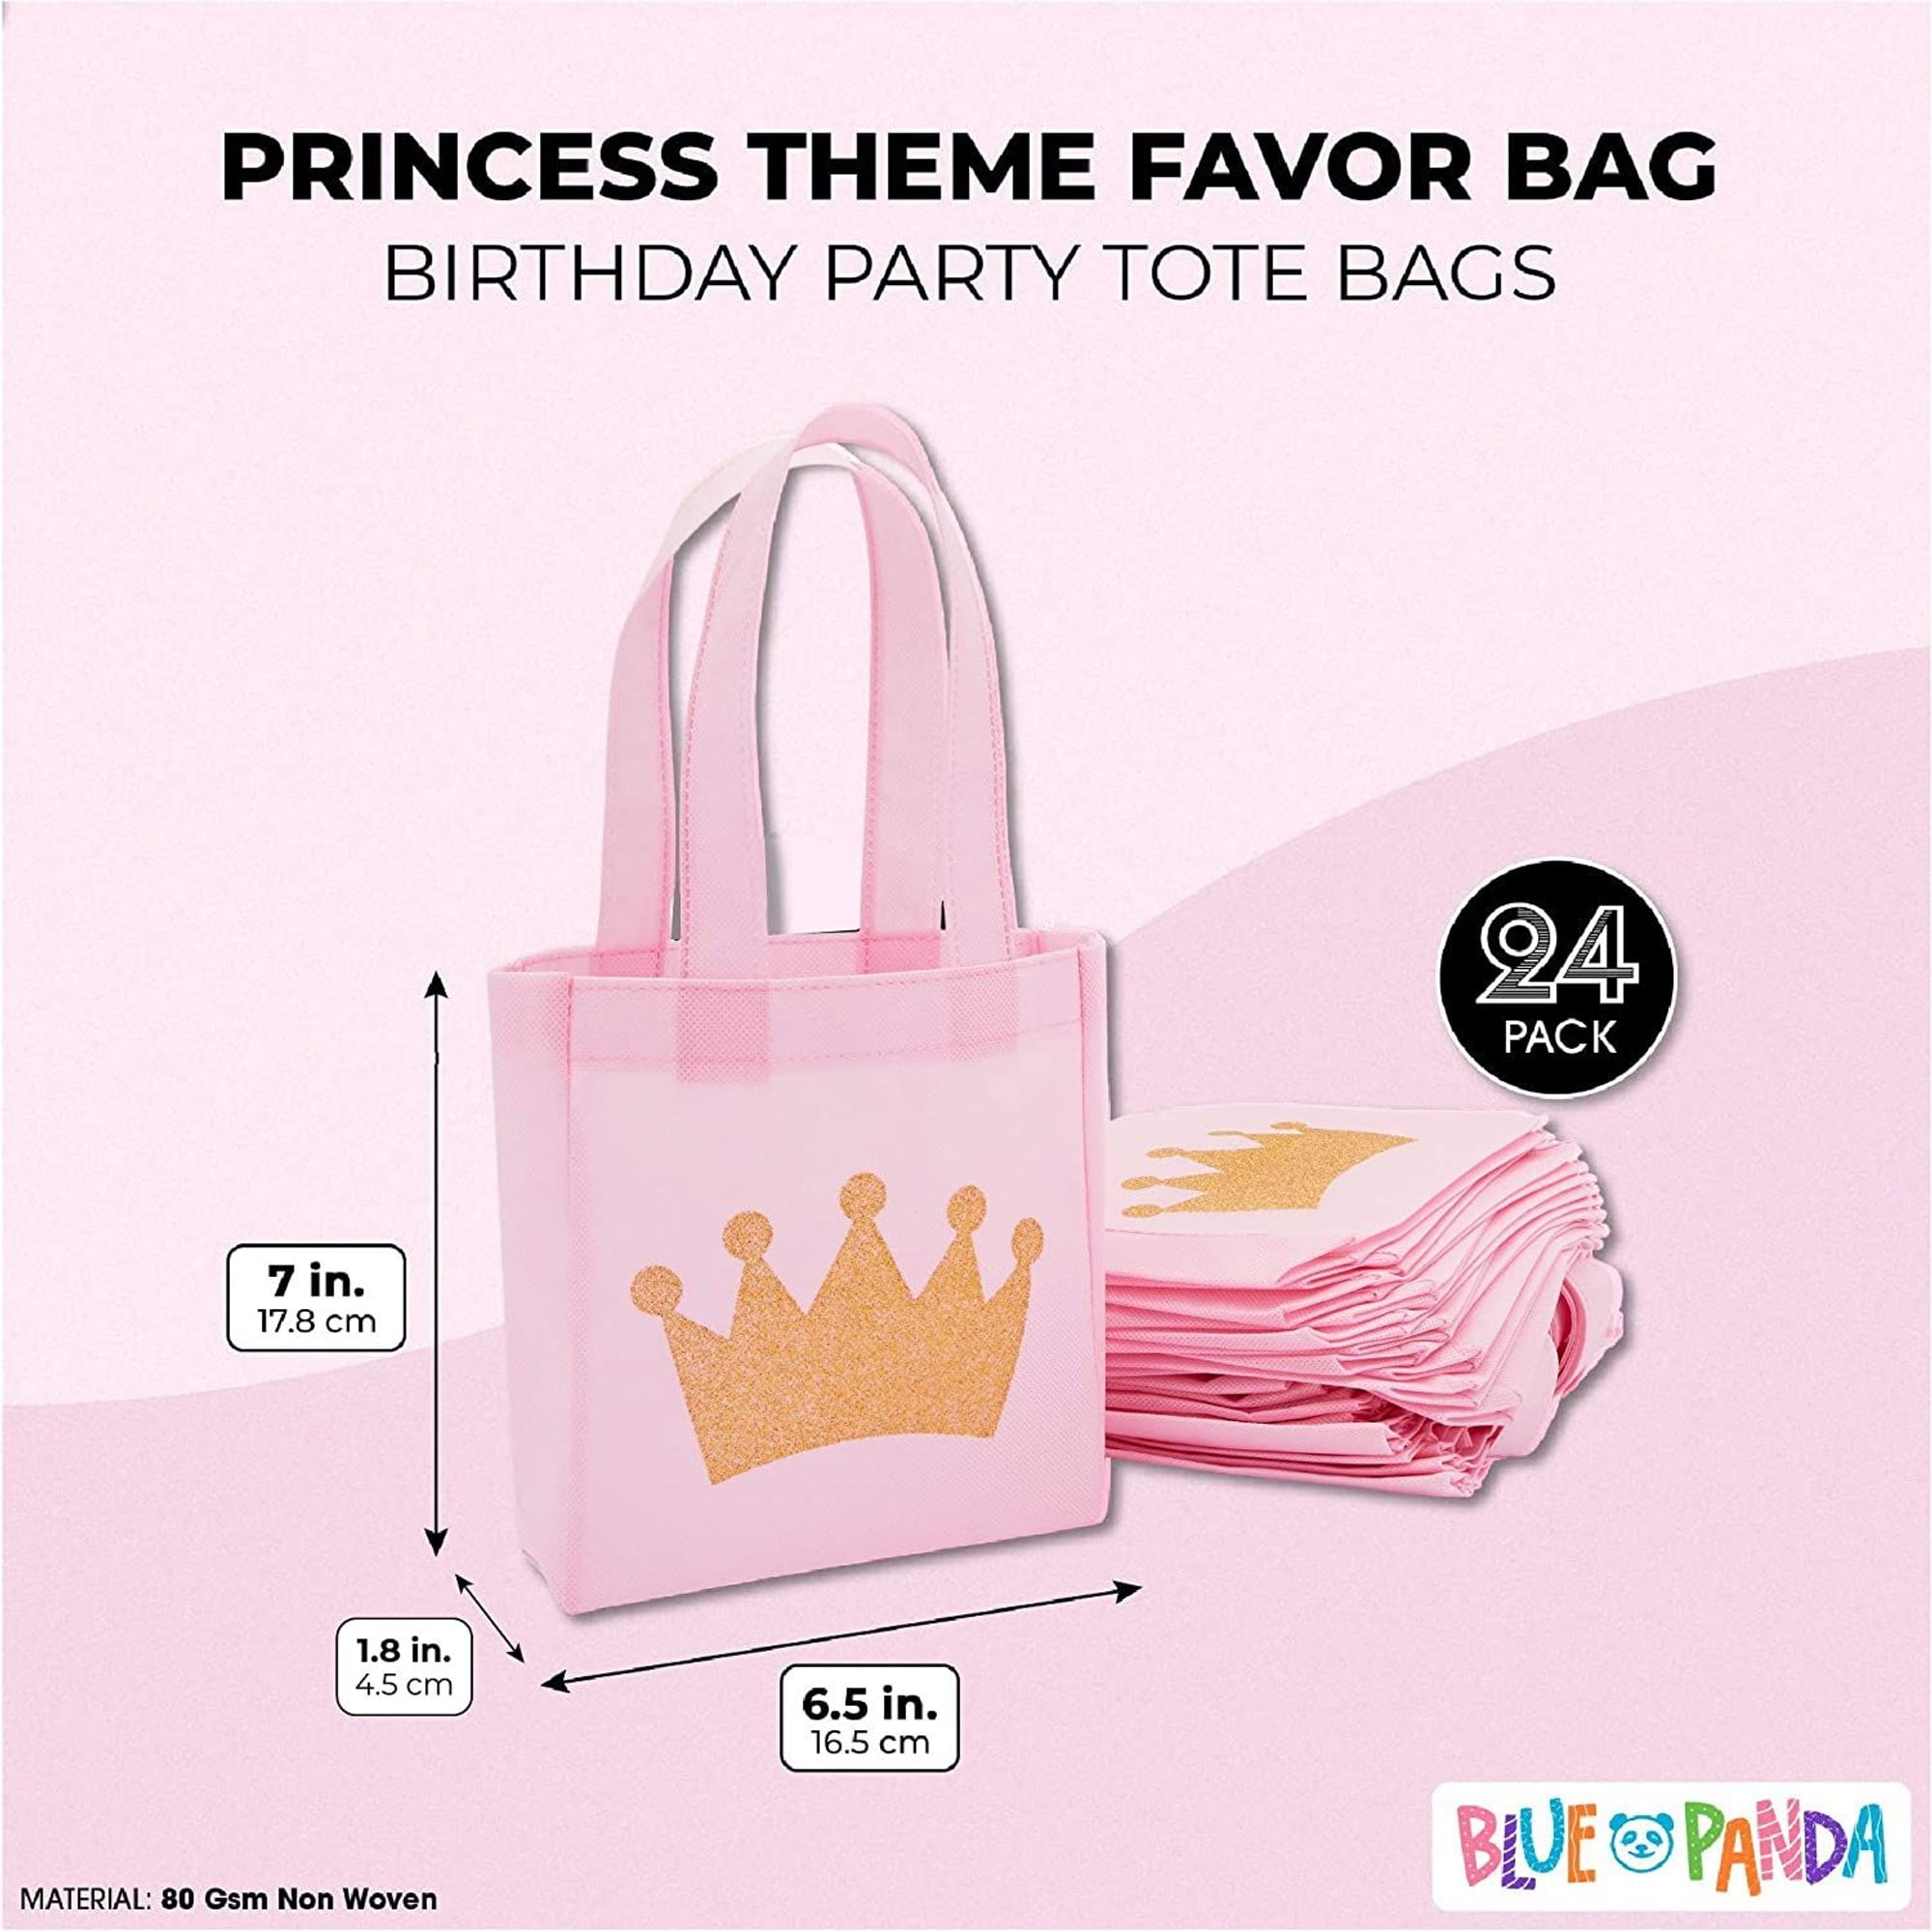 XUWAIDSGN 12 Pieces Pink Girls Party Favor Treat Bags Hot Pink Princess Gift Bags Candy Bags Girls Theme Party Goodie Bags with Handles for Girls